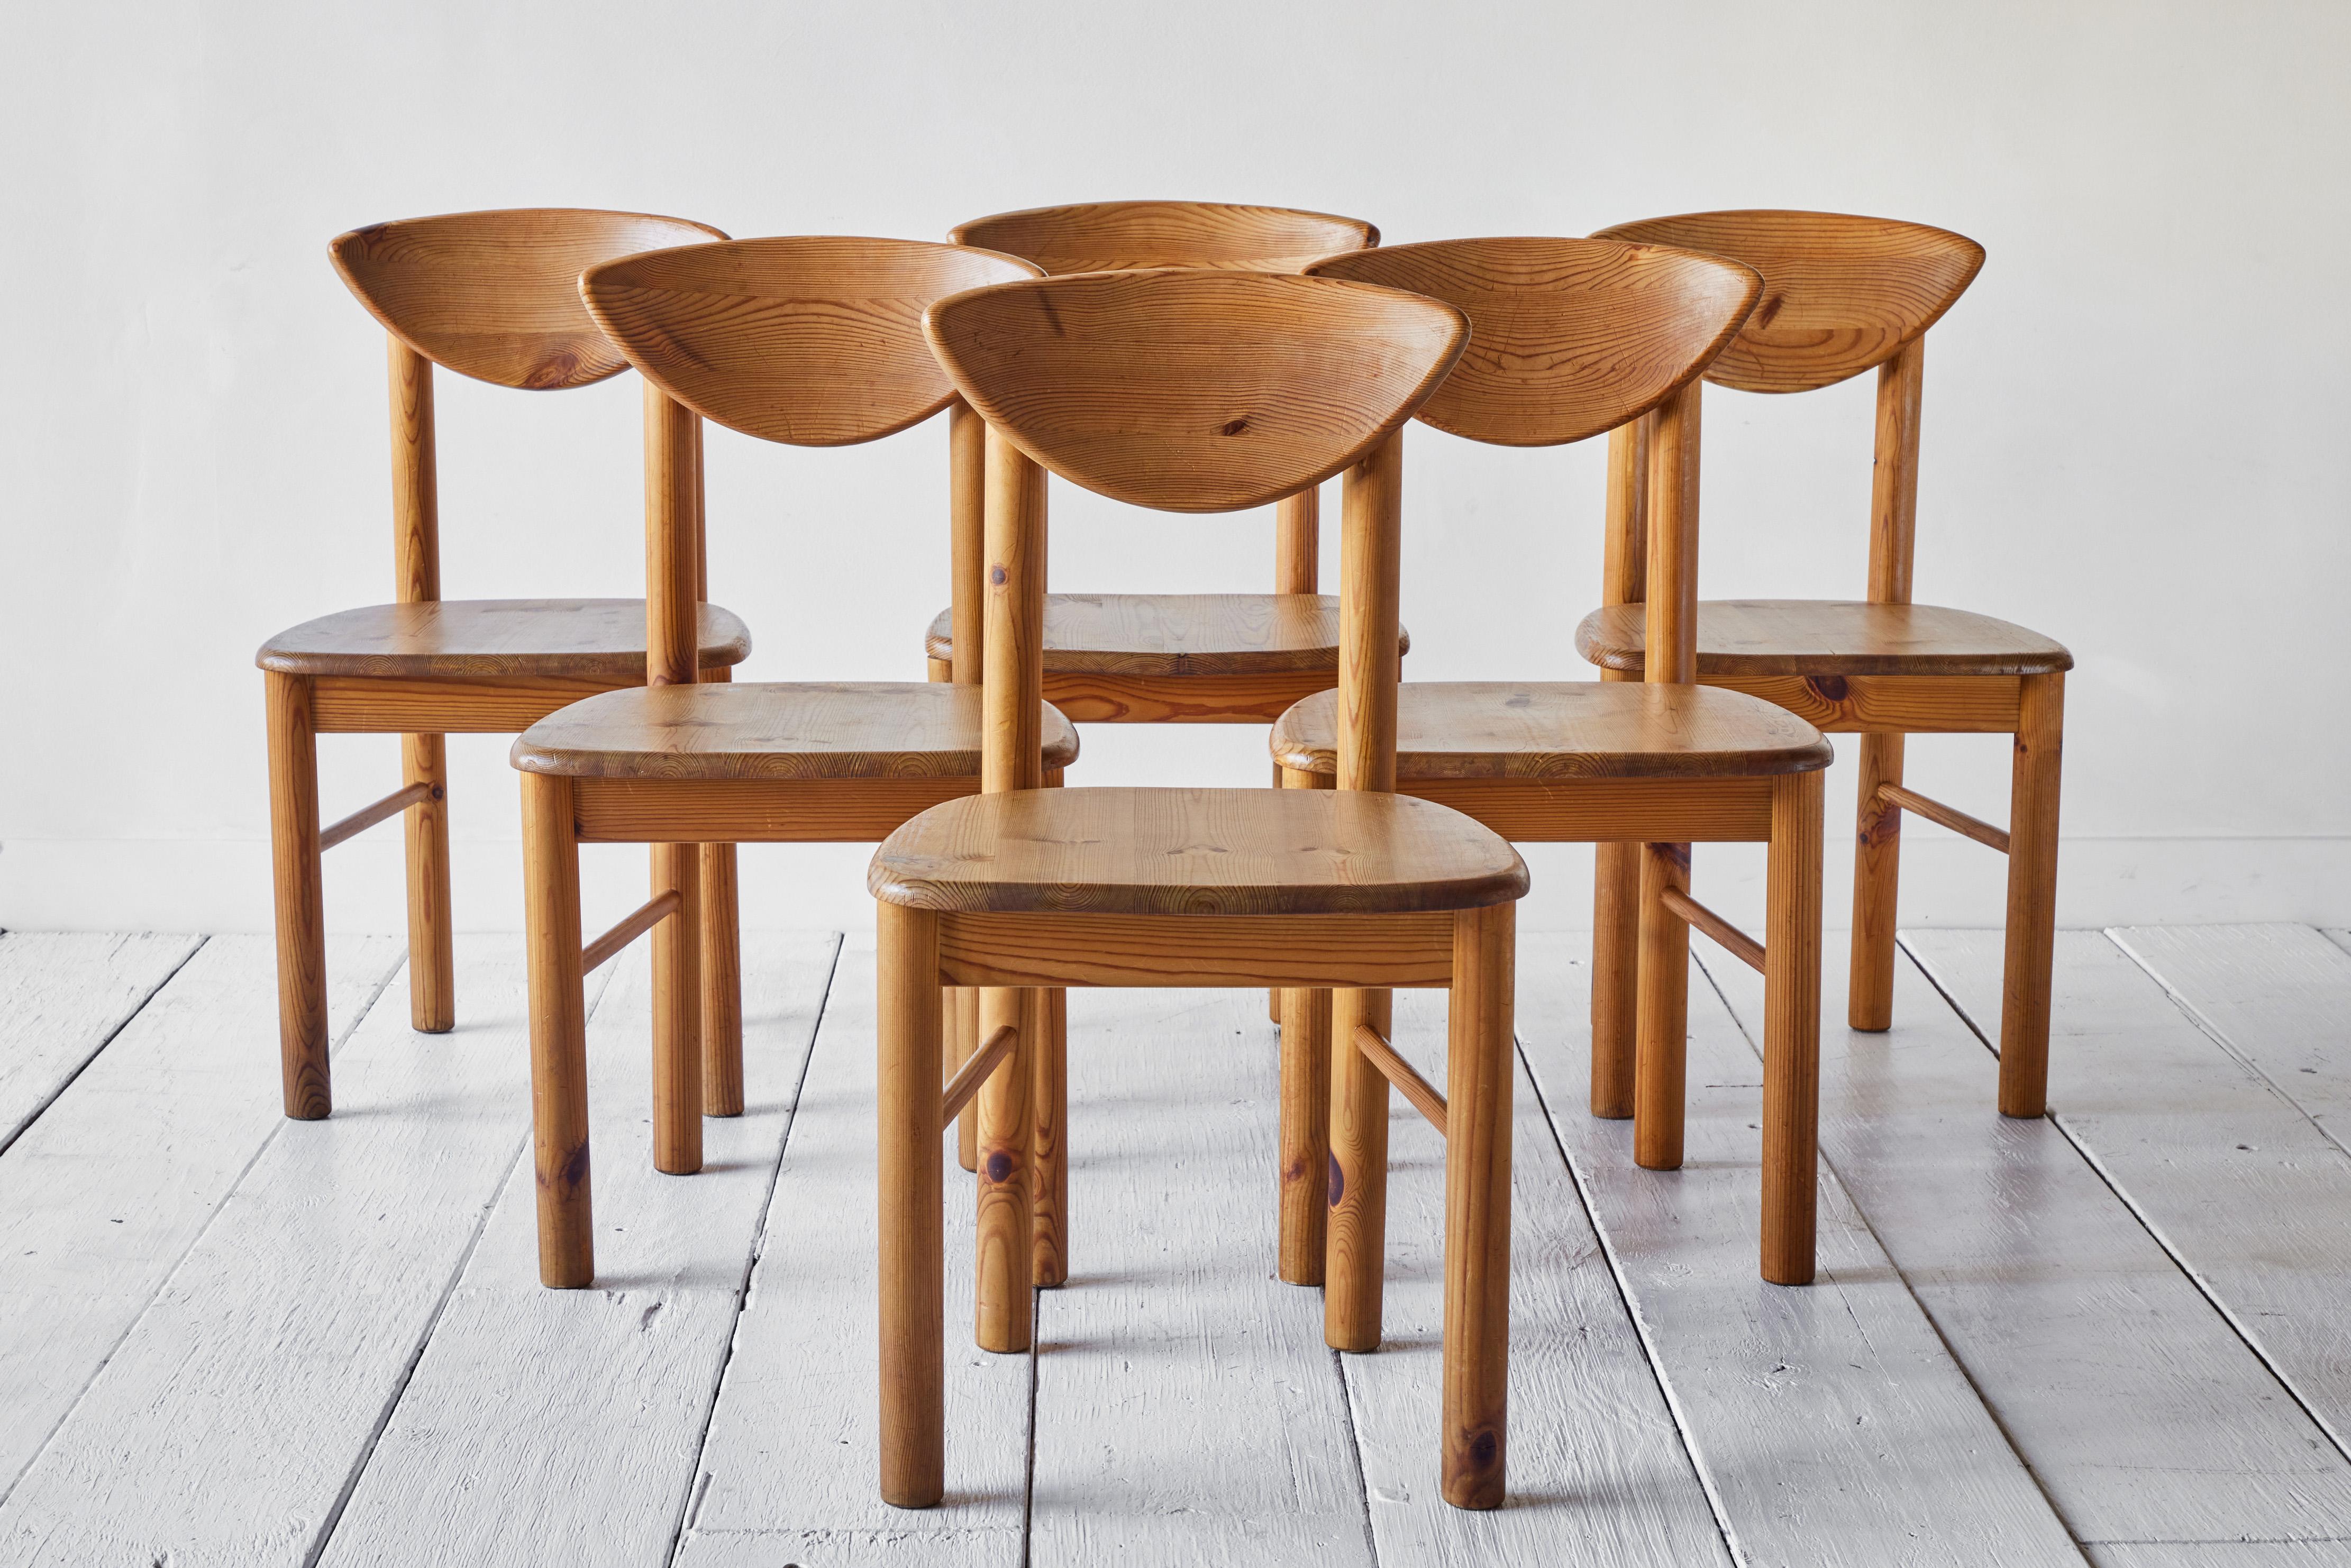 Set of six solid pine wood chairs designed by Rainer Daumiller and manufactured by Hirtshals Savvaerk in the 1970s. The chairs have a carved seat and backrest which give them a robust and organic appearance. The rustic pine wood boasts a rich and